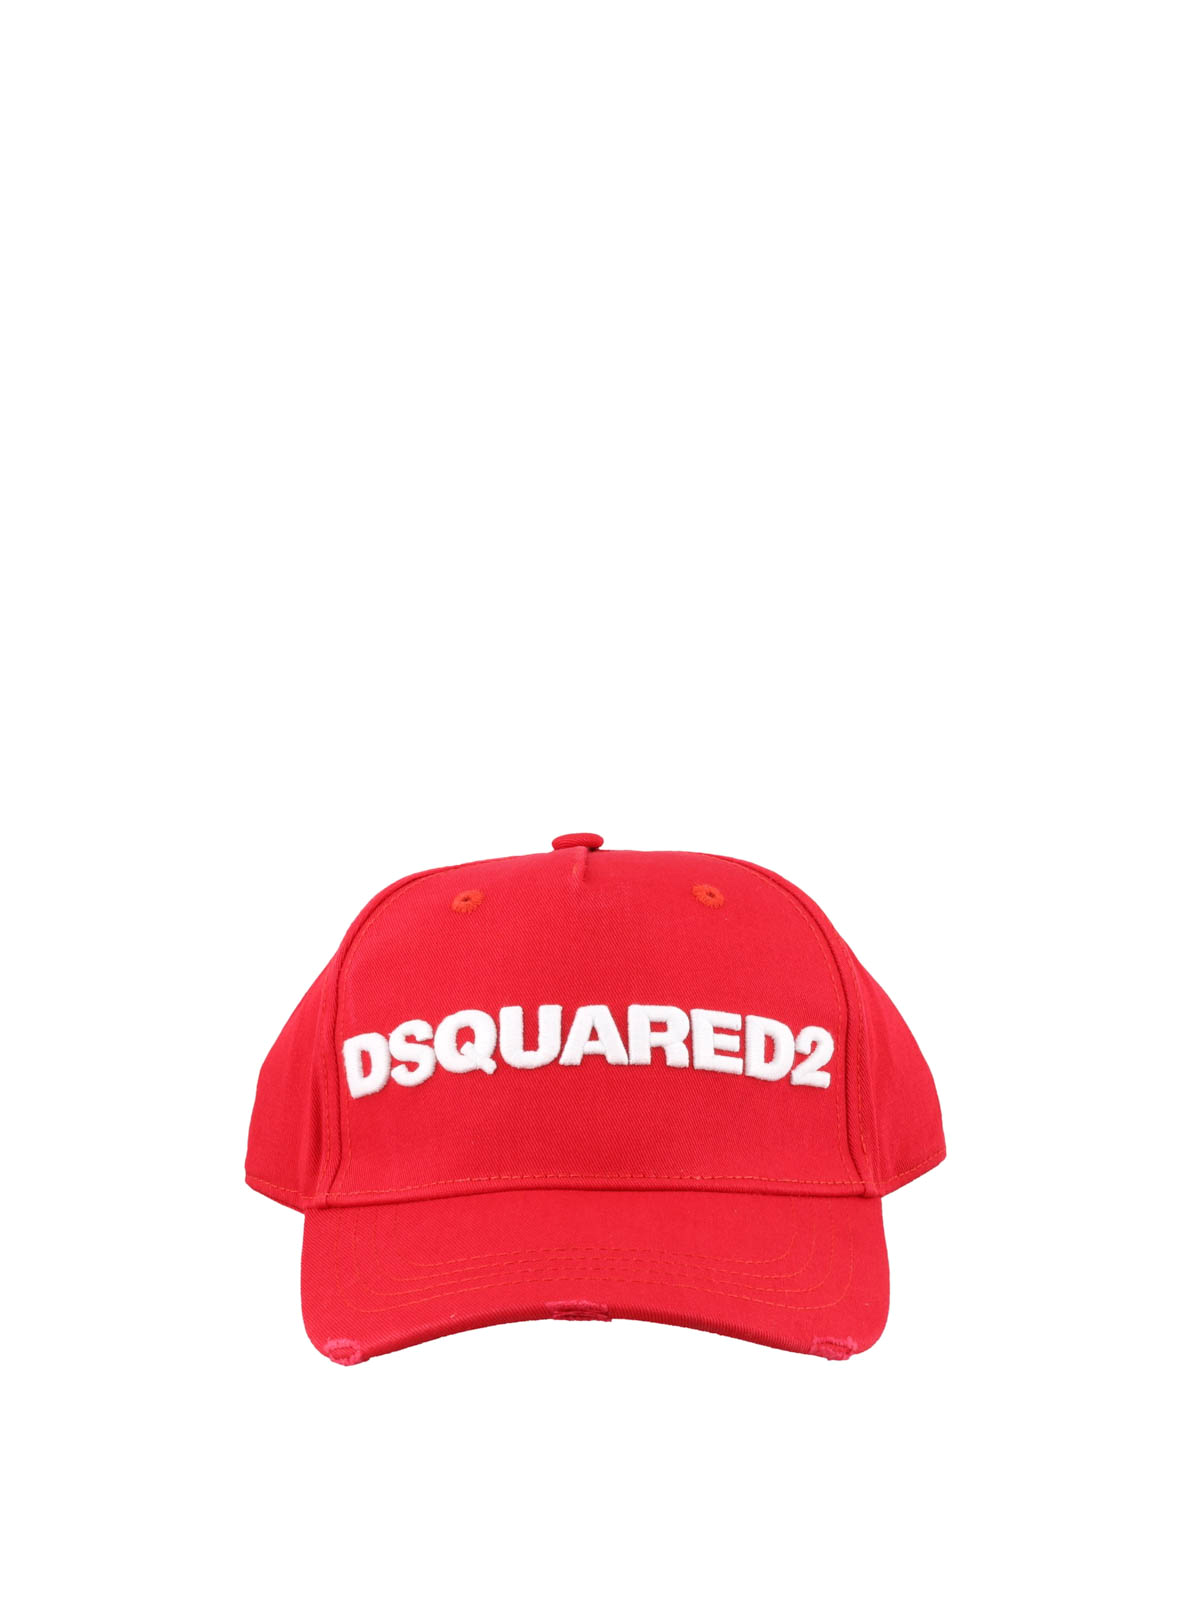 Hats & caps Dsquared2 - Red baseball cap with logo embroidery ...